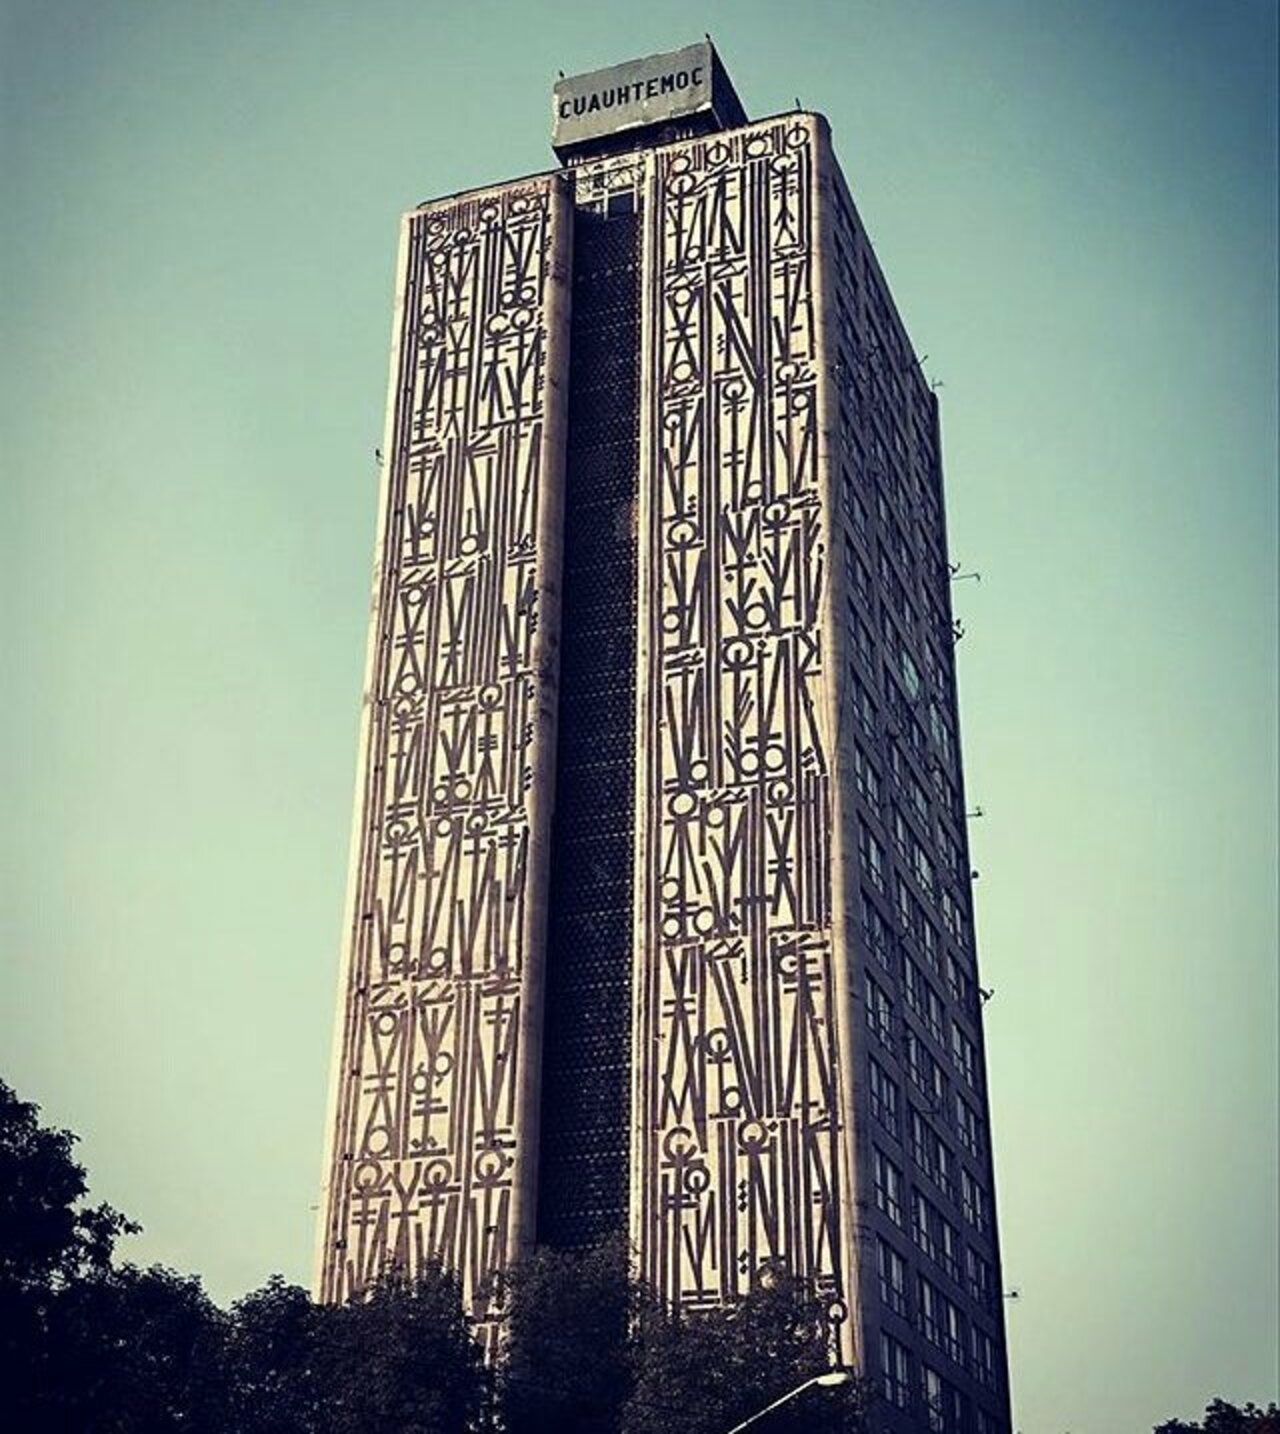 This has to be one of those most beautiful pieces ever painted....Retna #MADSOCIETYKINGS#mexico #mexicocity #art https://t.co/GVwk7Ma9qG